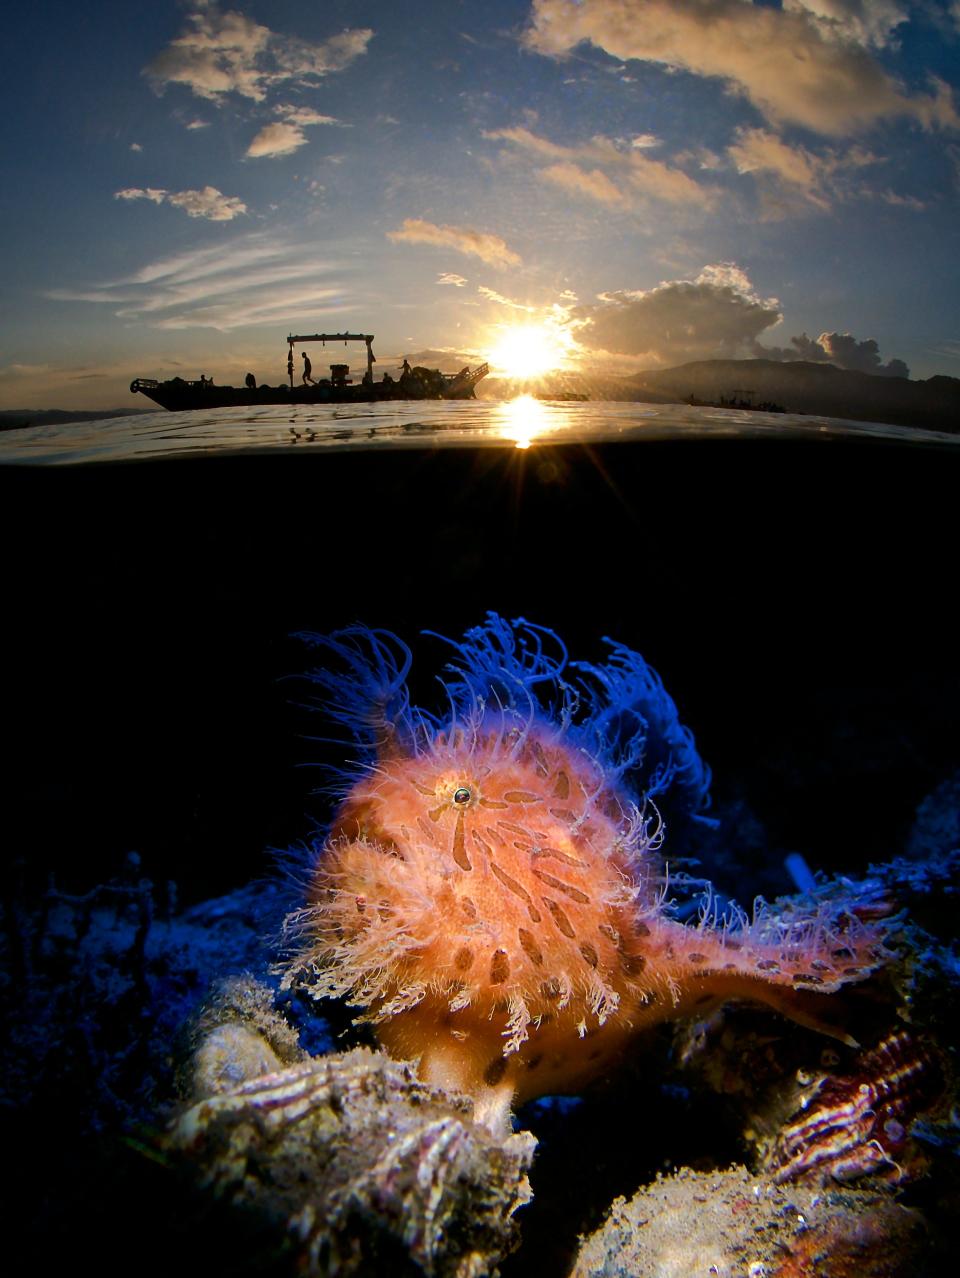 "Hairy in the Sunrise" by Enrico Somogyi. A coral reef under the surface of the water.